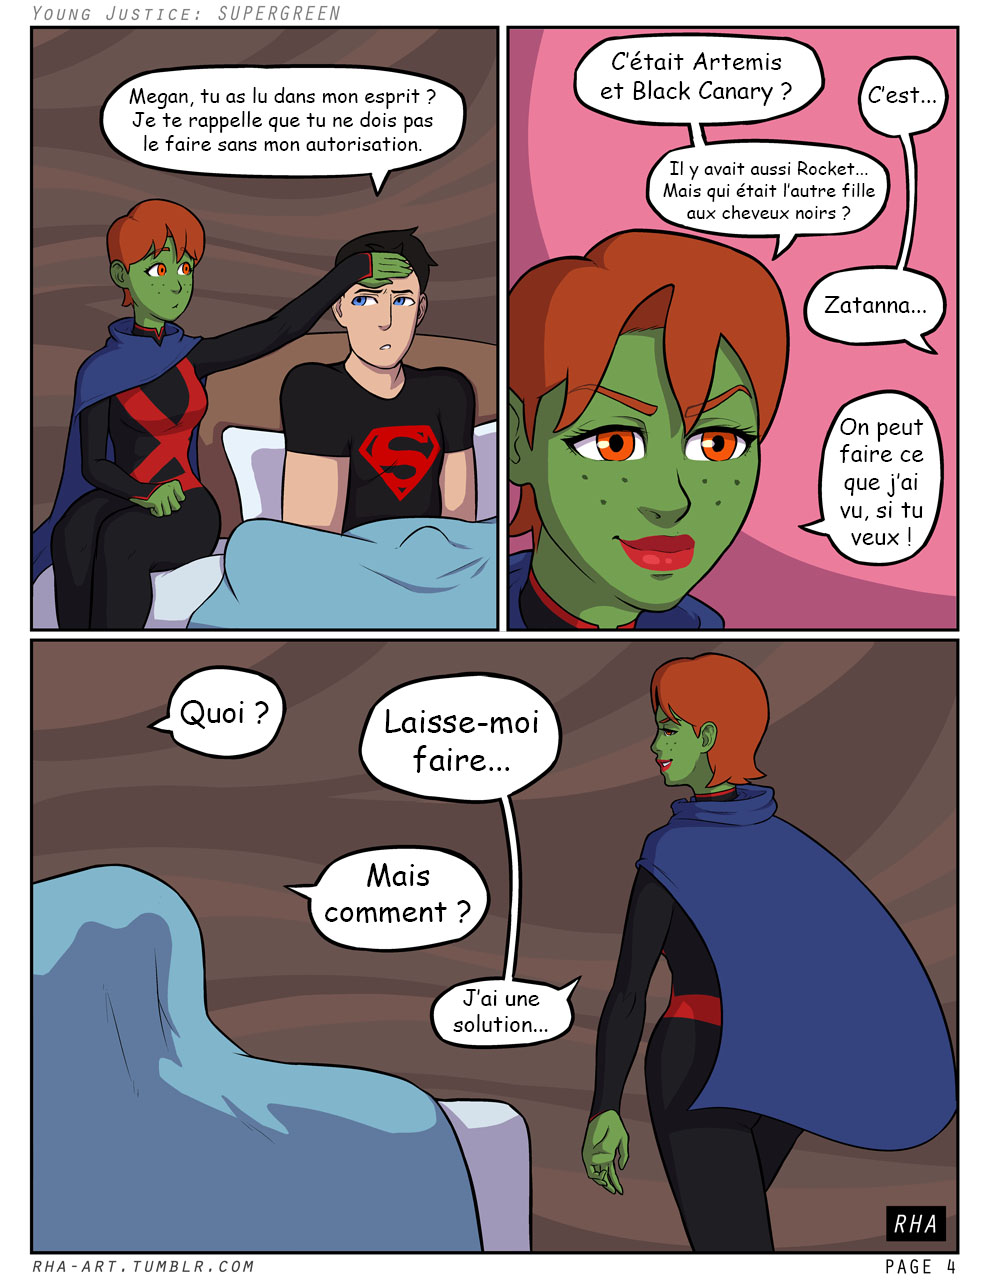 Young Justice: Supergreen numero d'image 3